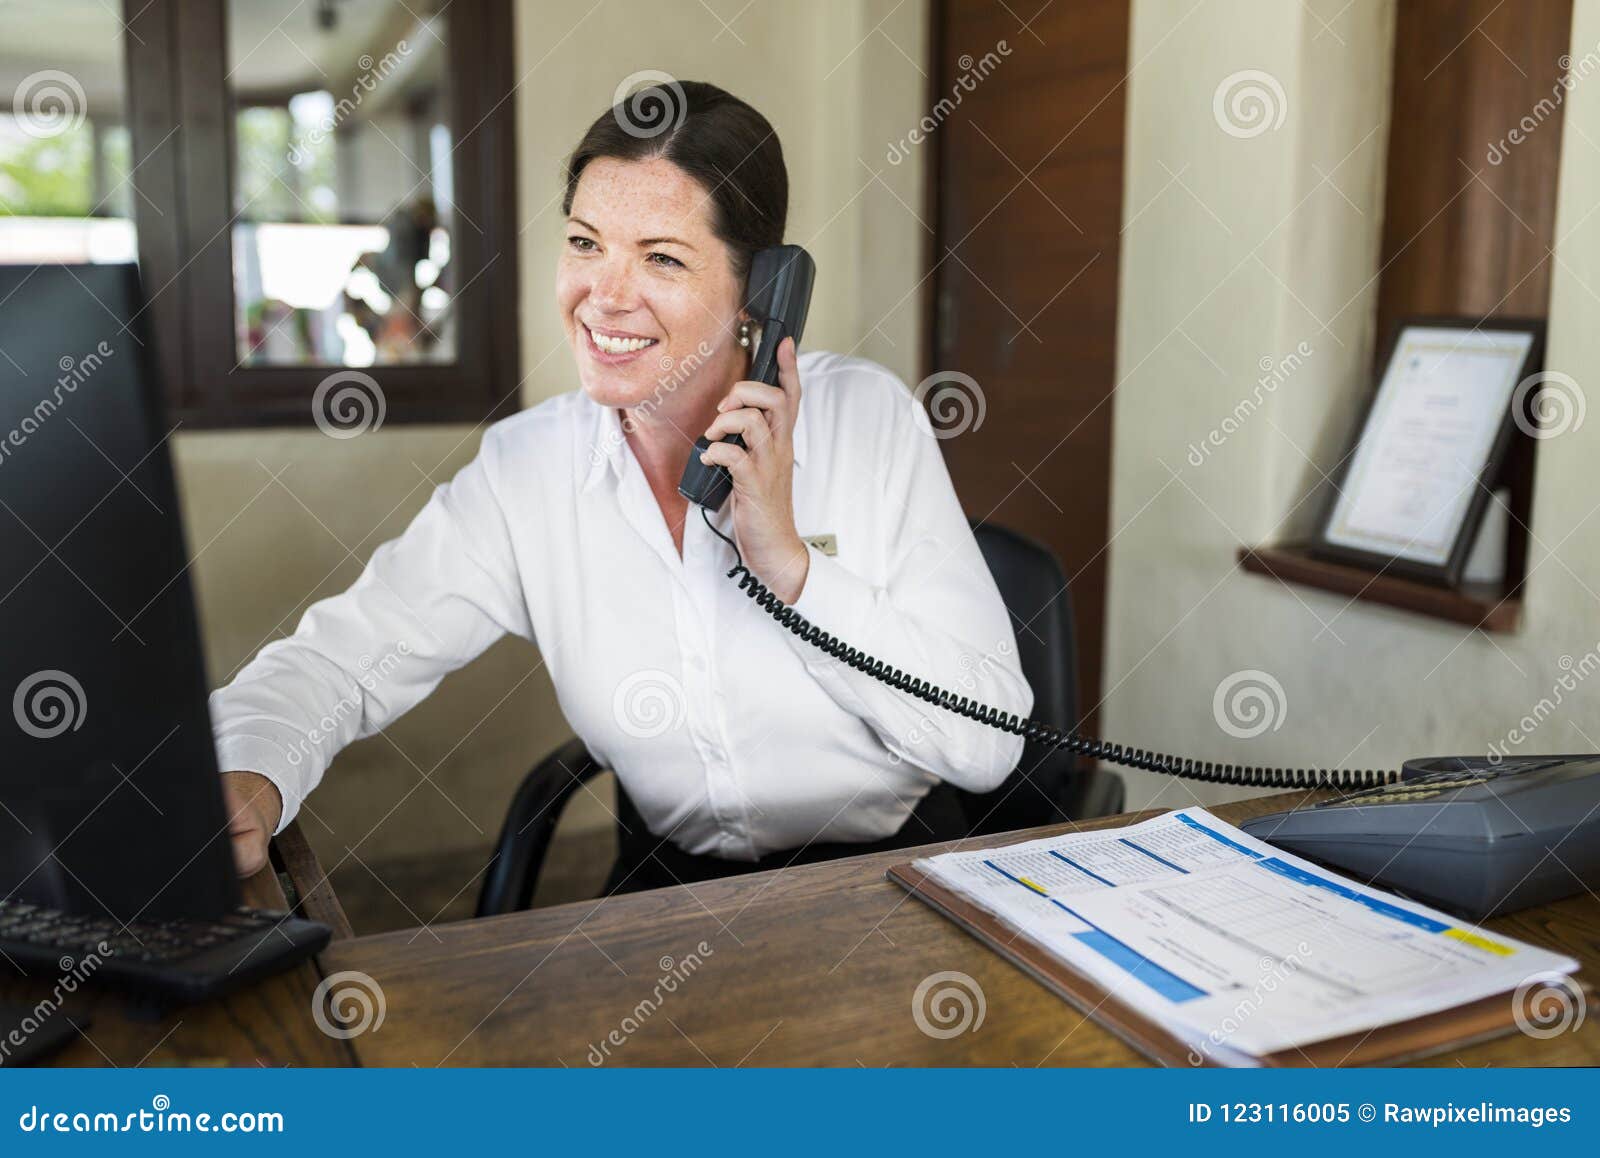 female resort receptionist working at the front desk